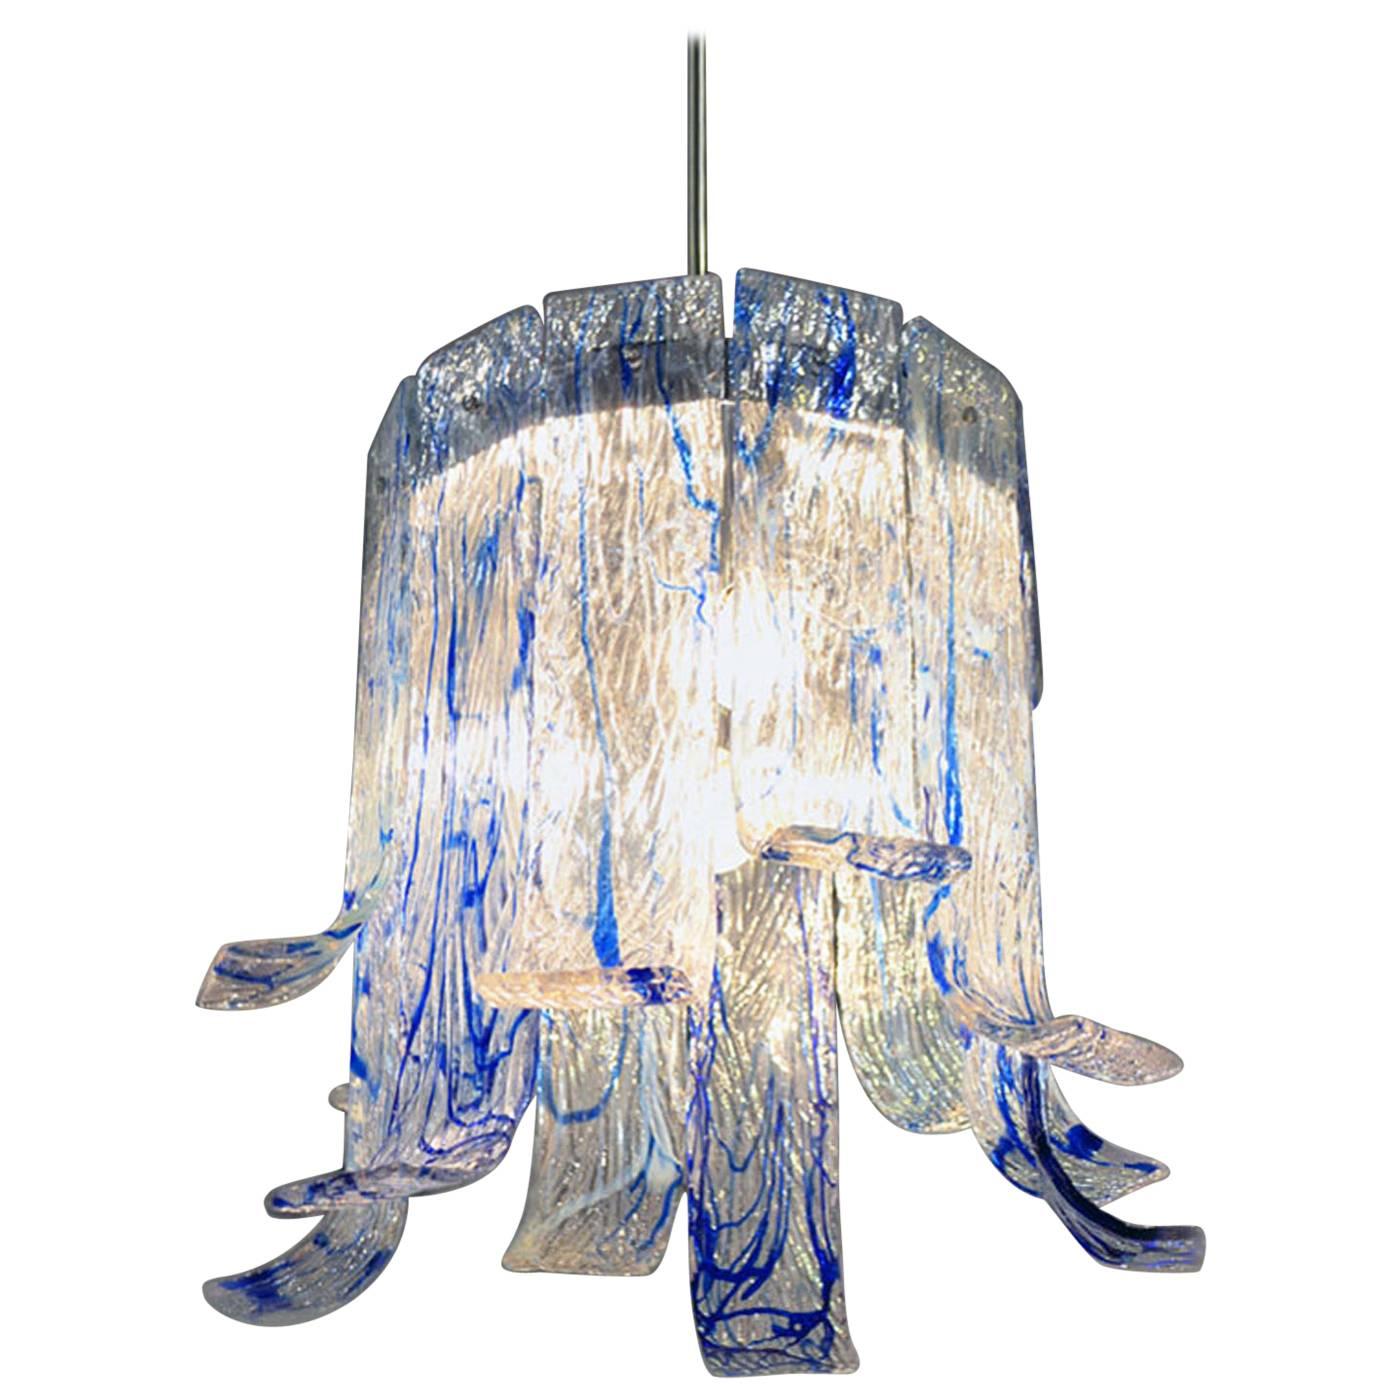 Mazzega Murano 1970s Chandelier in Transparent Glass with Blue Filaments For Sale